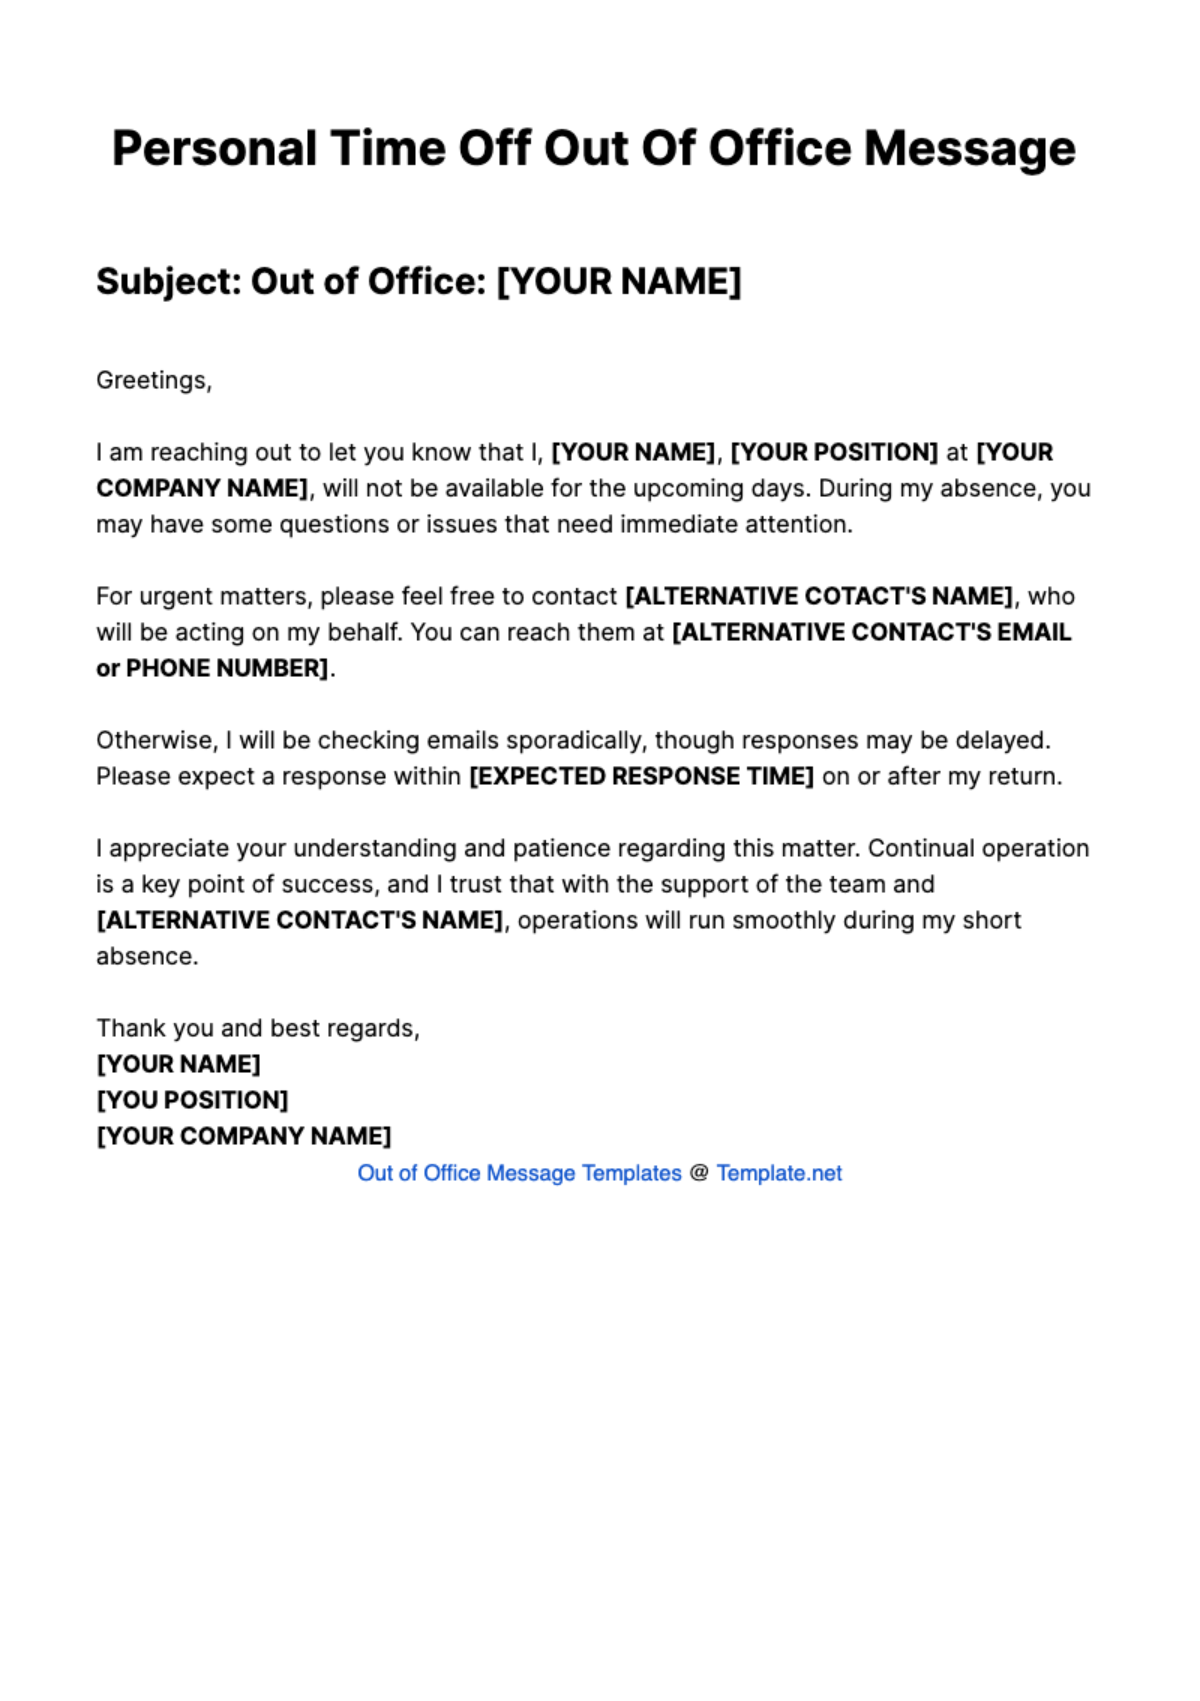 Personal Time Off Out Of Office Message Template